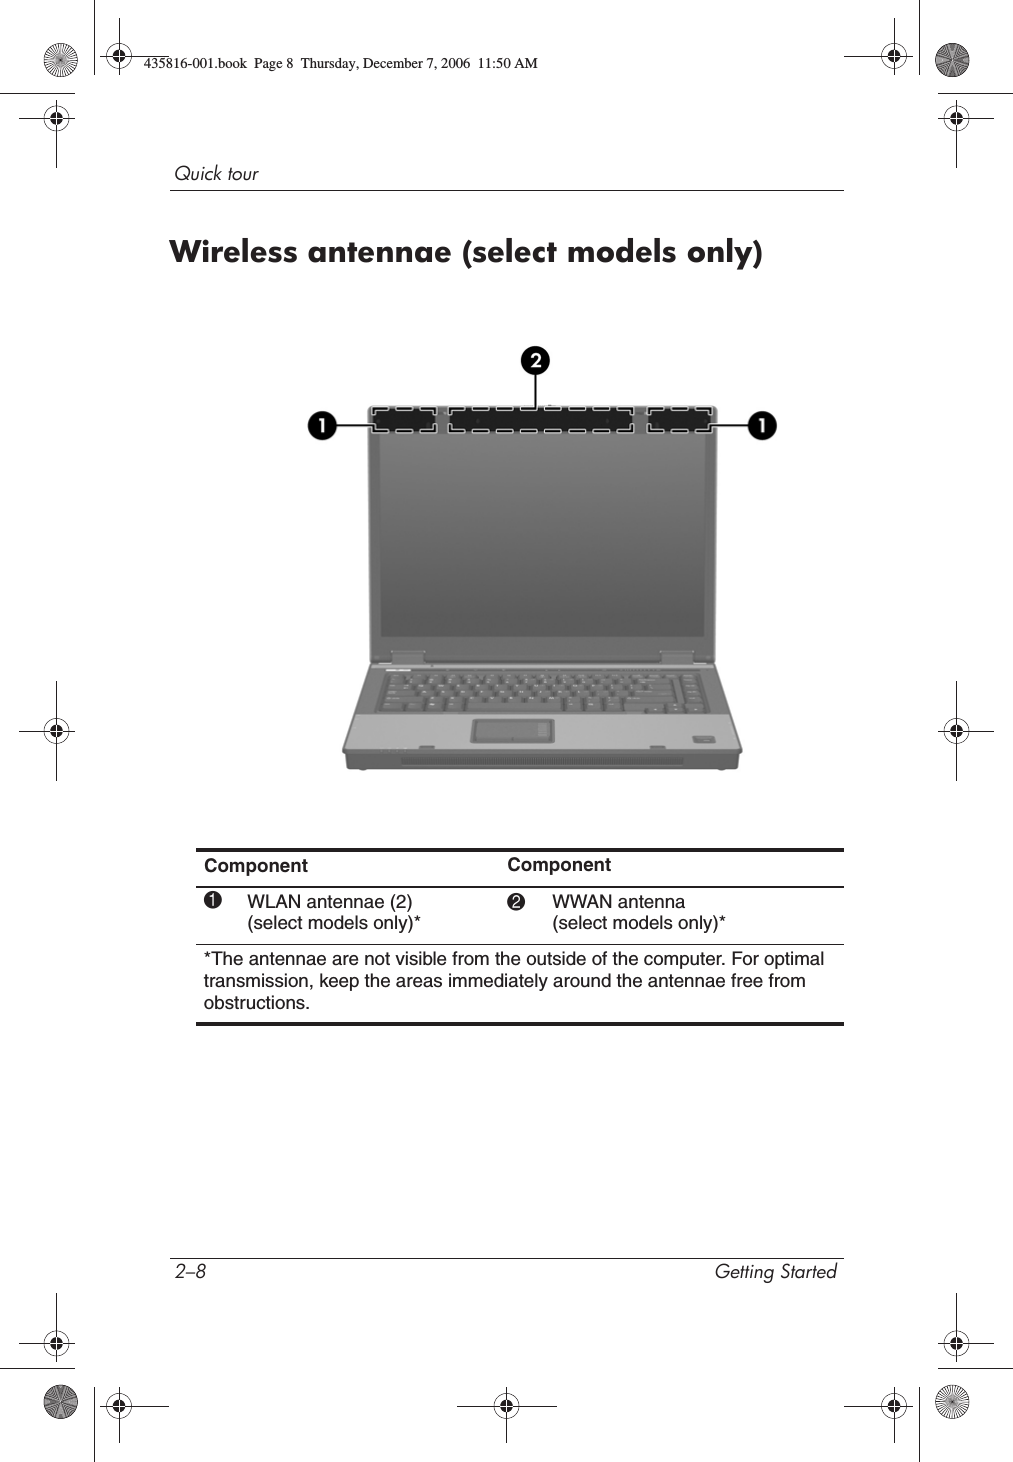 2–8 Getting StartedQuick tourWireless antennae (select models only)Component Component1WLAN antennae (2) (select models only)*2WWAN antenna (select models only)**The antennae are not visible from the outside of the computer. For optimal transmission, keep the areas immediately around the antennae free from obstructions.435816-001.book  Page 8  Thursday, December 7, 2006  11:50 AM